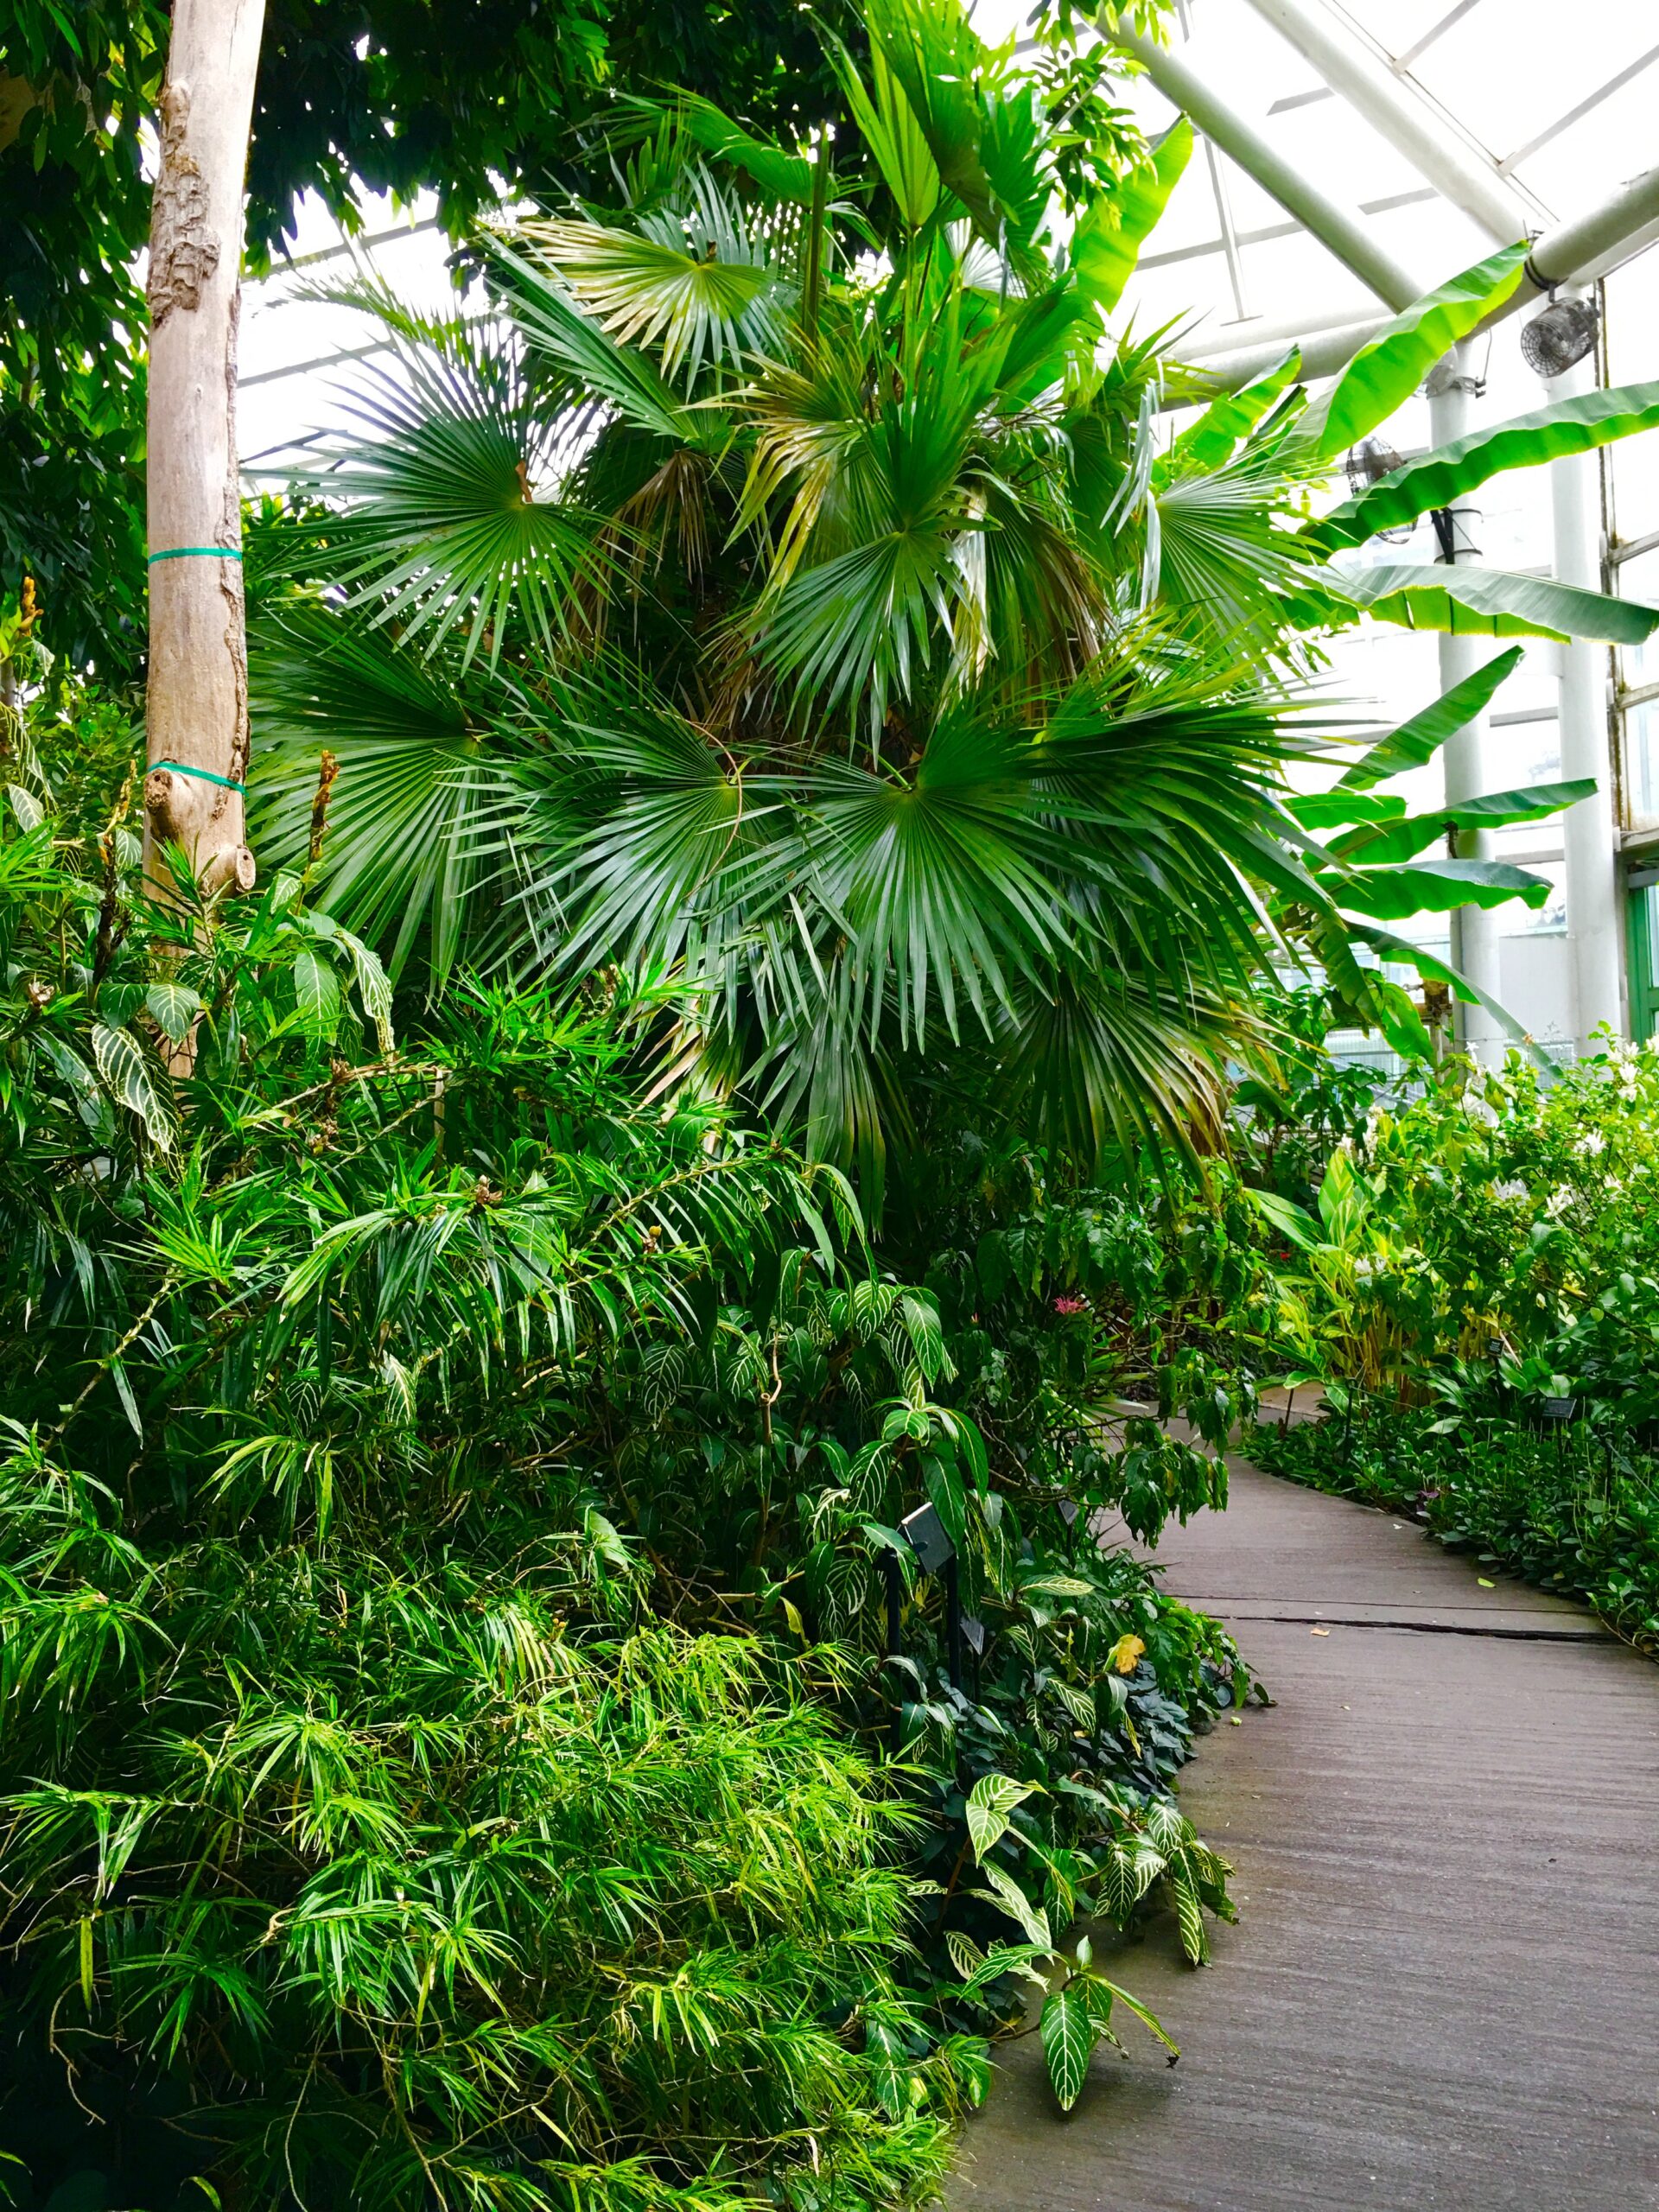 It’s nice and warm in the Tropical Pavilion at Brooklyn Botanic Garden. Photo: Lore Croghan/Brooklyn Eagle